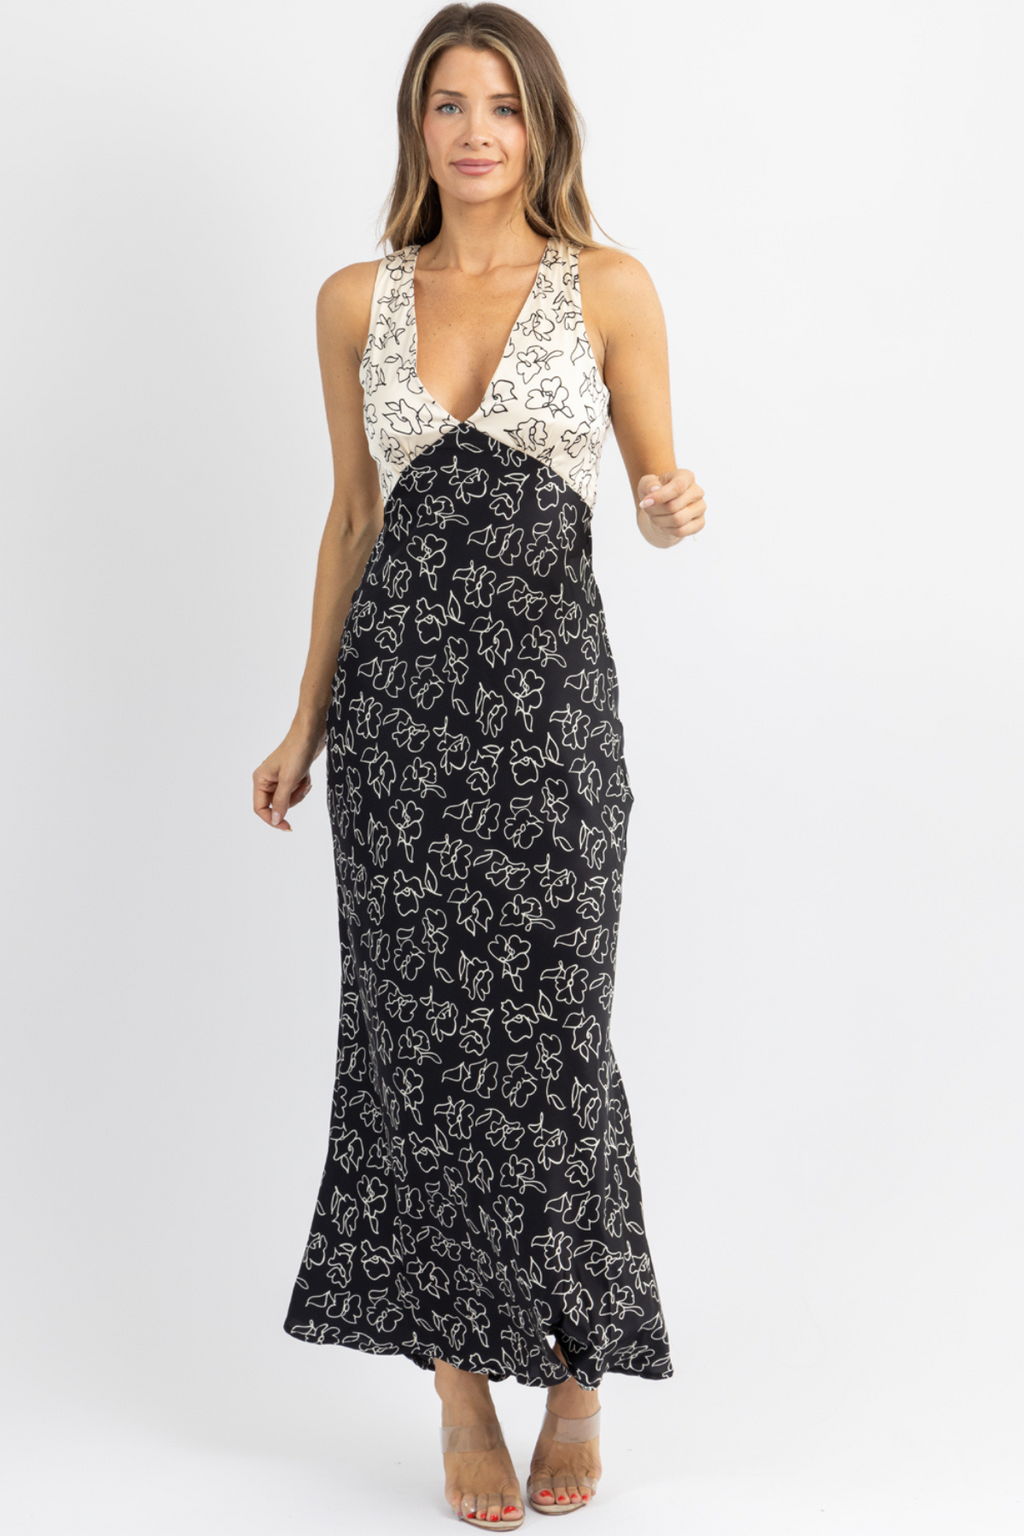 DAY + NIGHT FLORAL MAXI DRESS